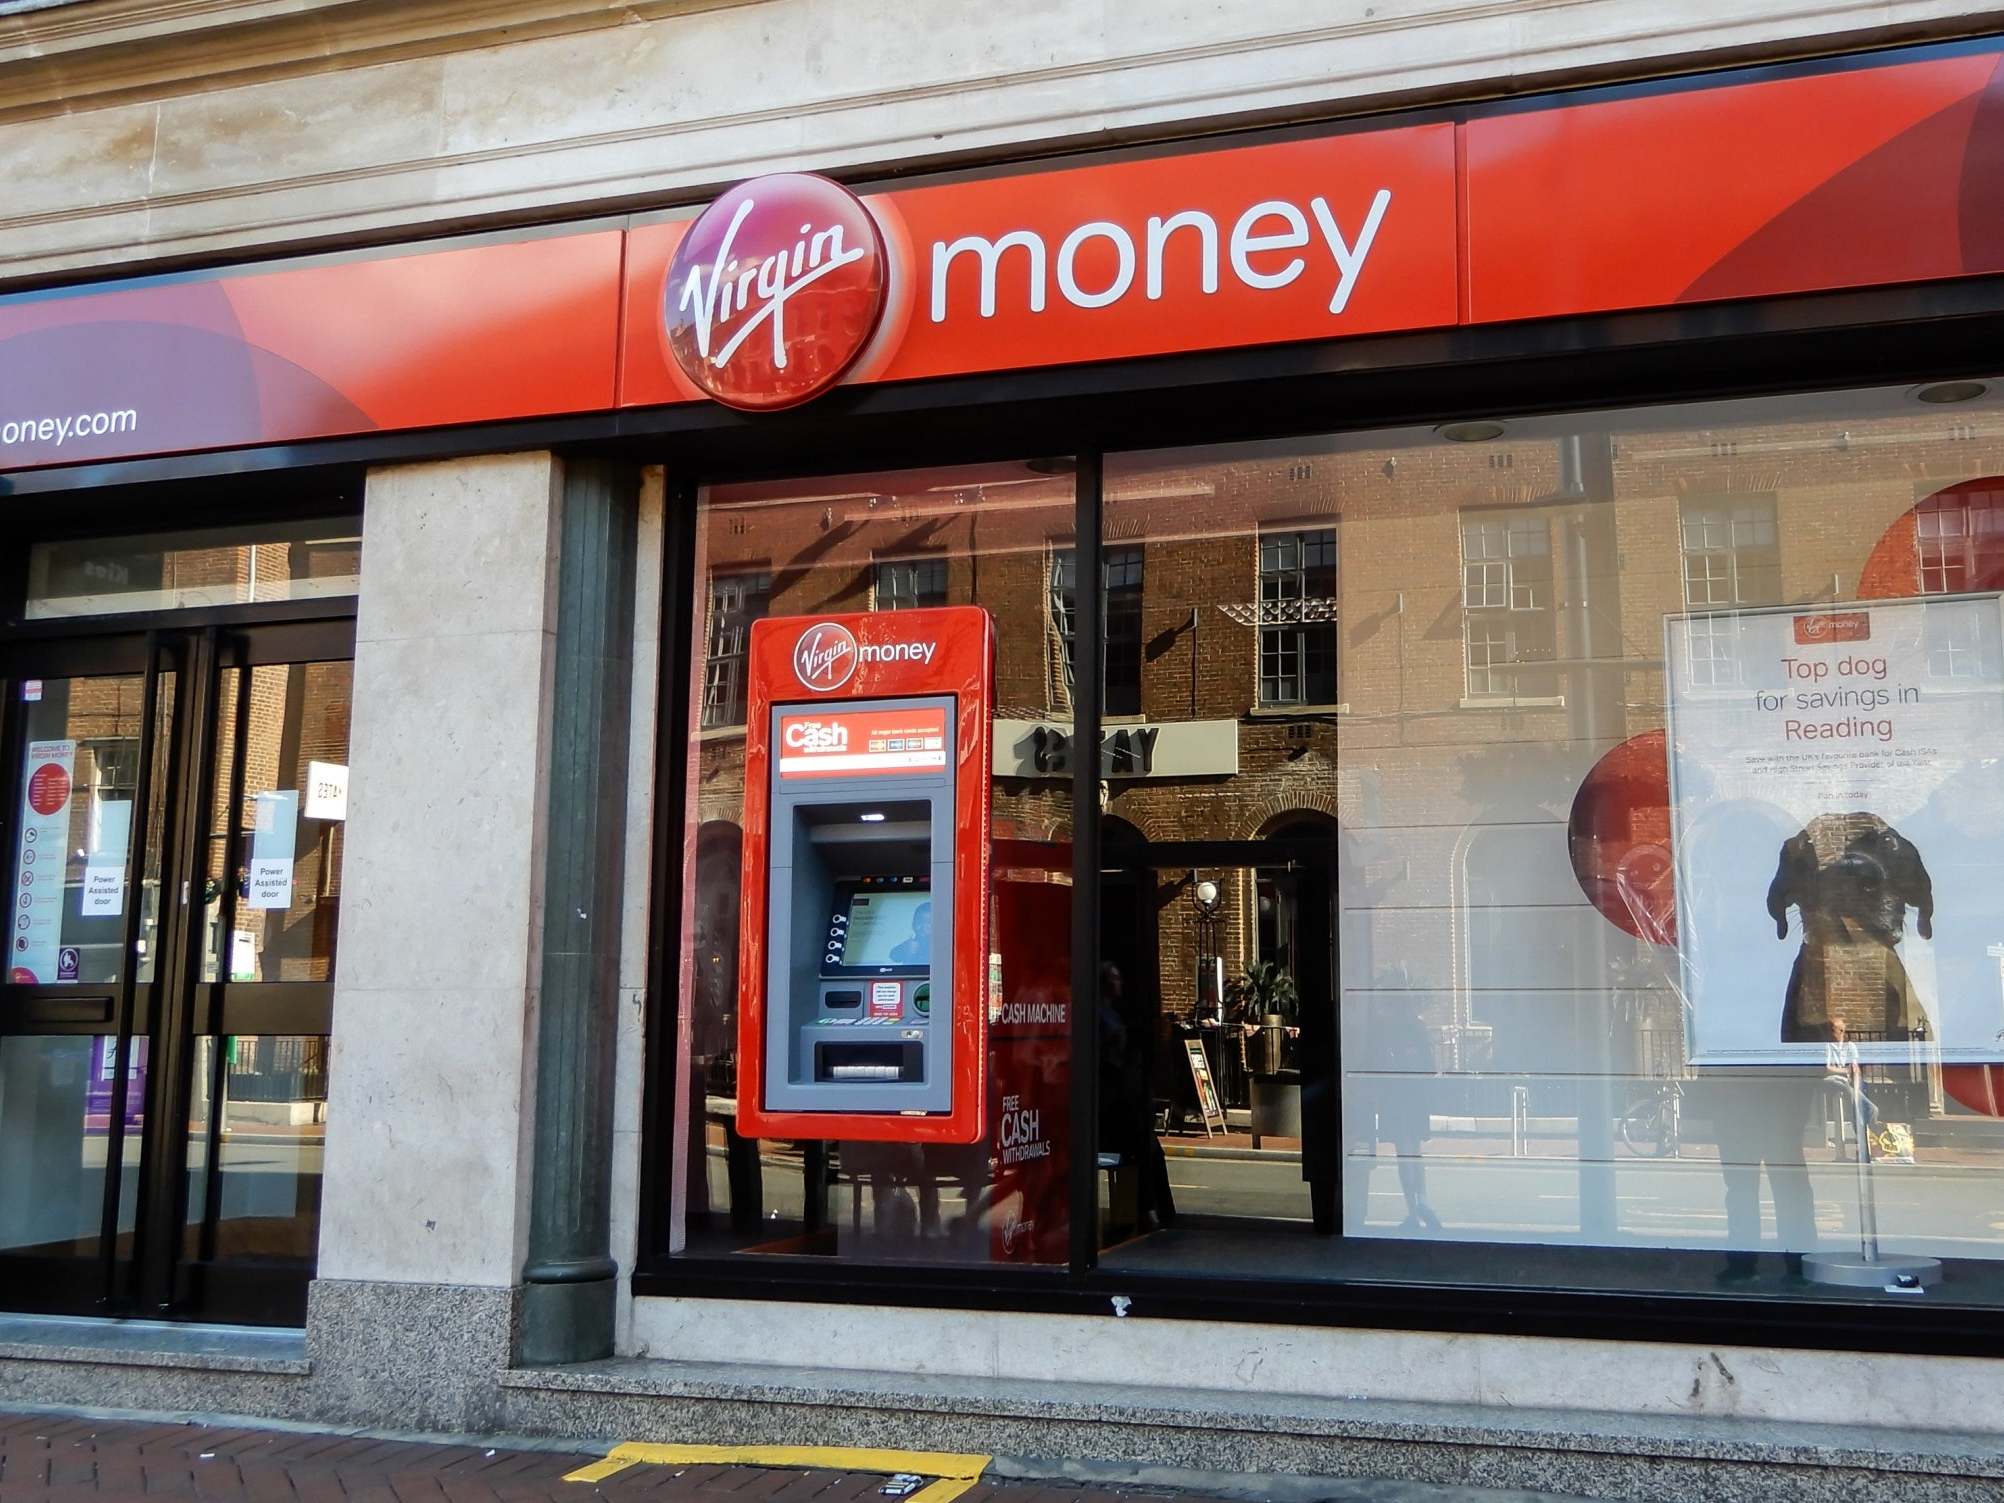 Virgin Money: the last challenger bank with a genuine punch?